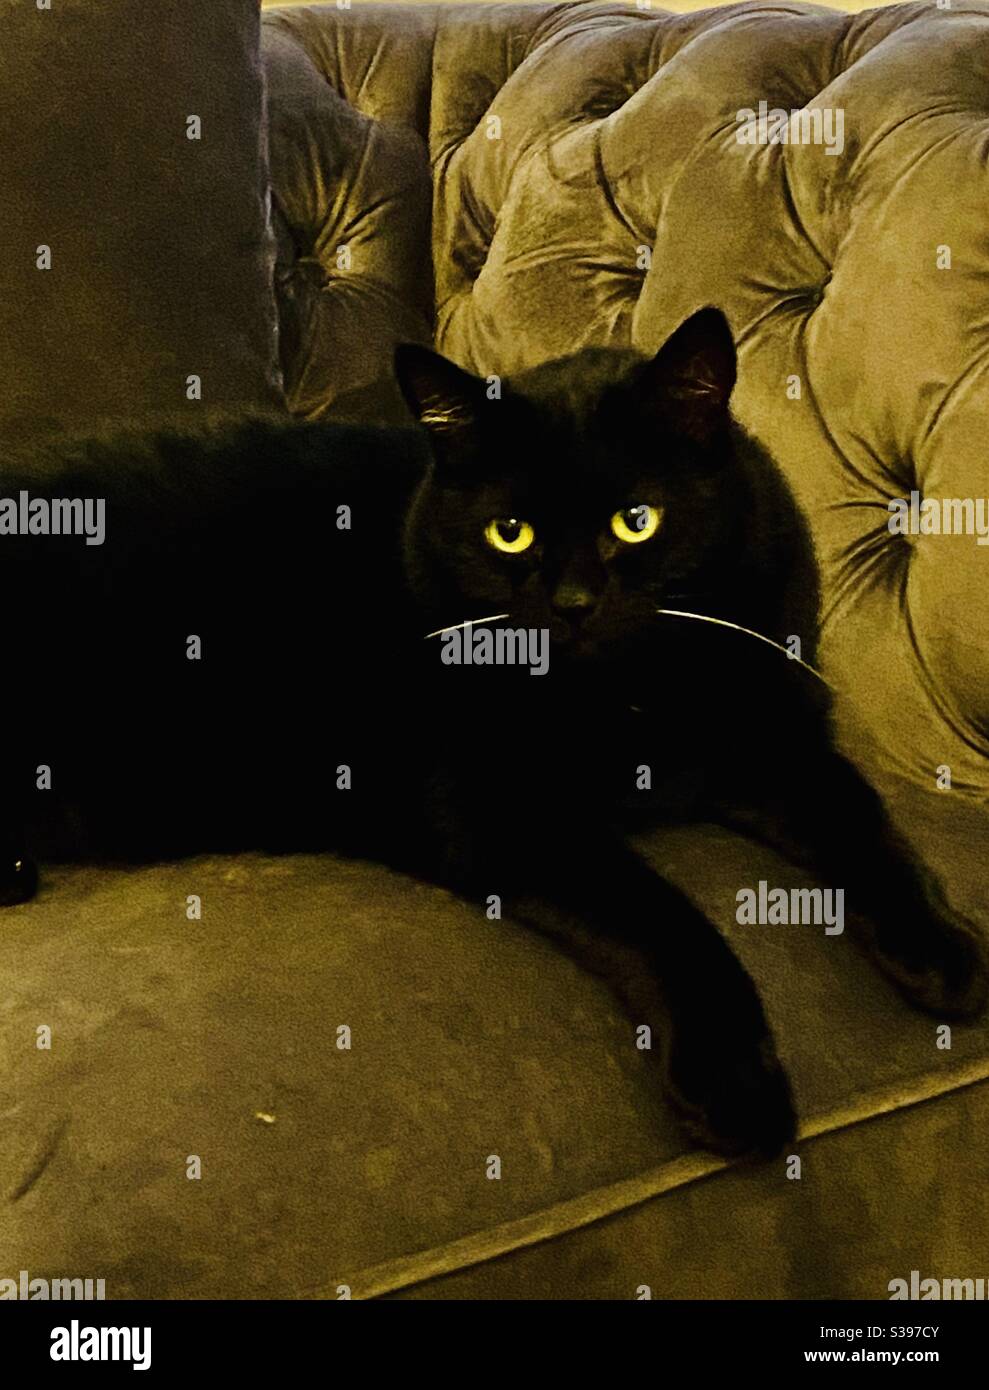 Black cat with green eyes and white whiskers on a velvet chair Stock Photo